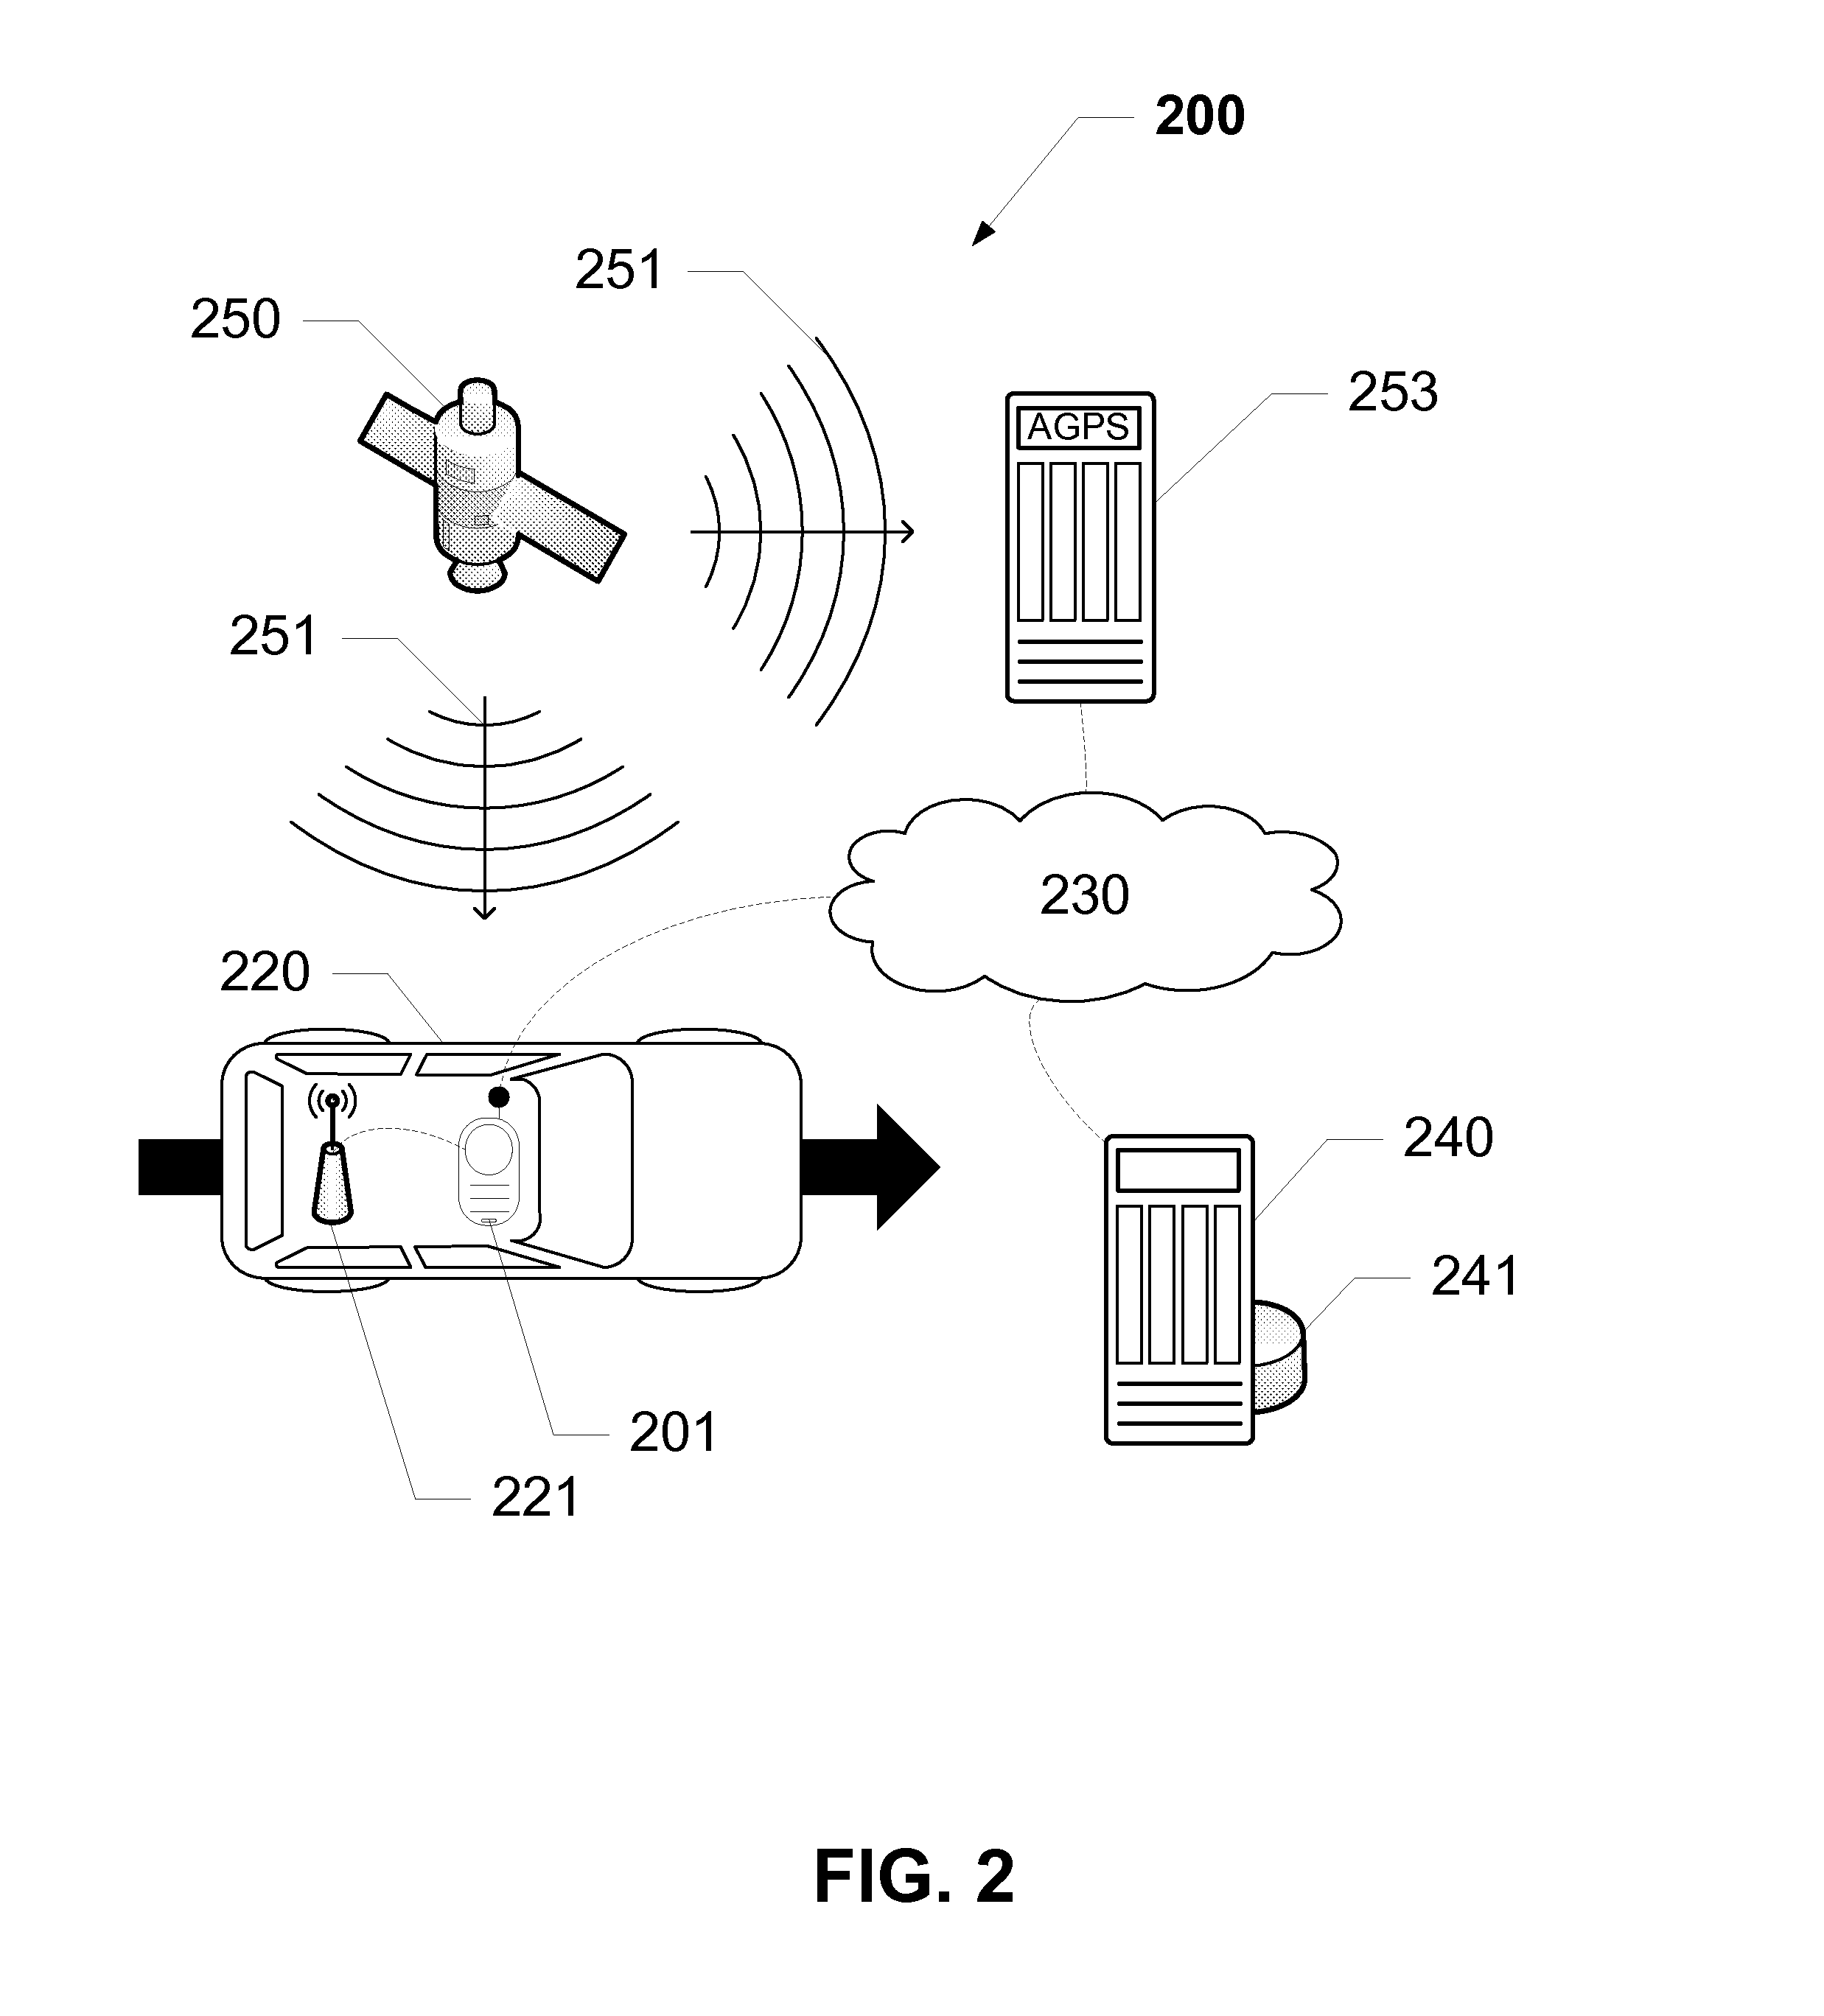 Controlled Text-Based Communication on Mobile Devices